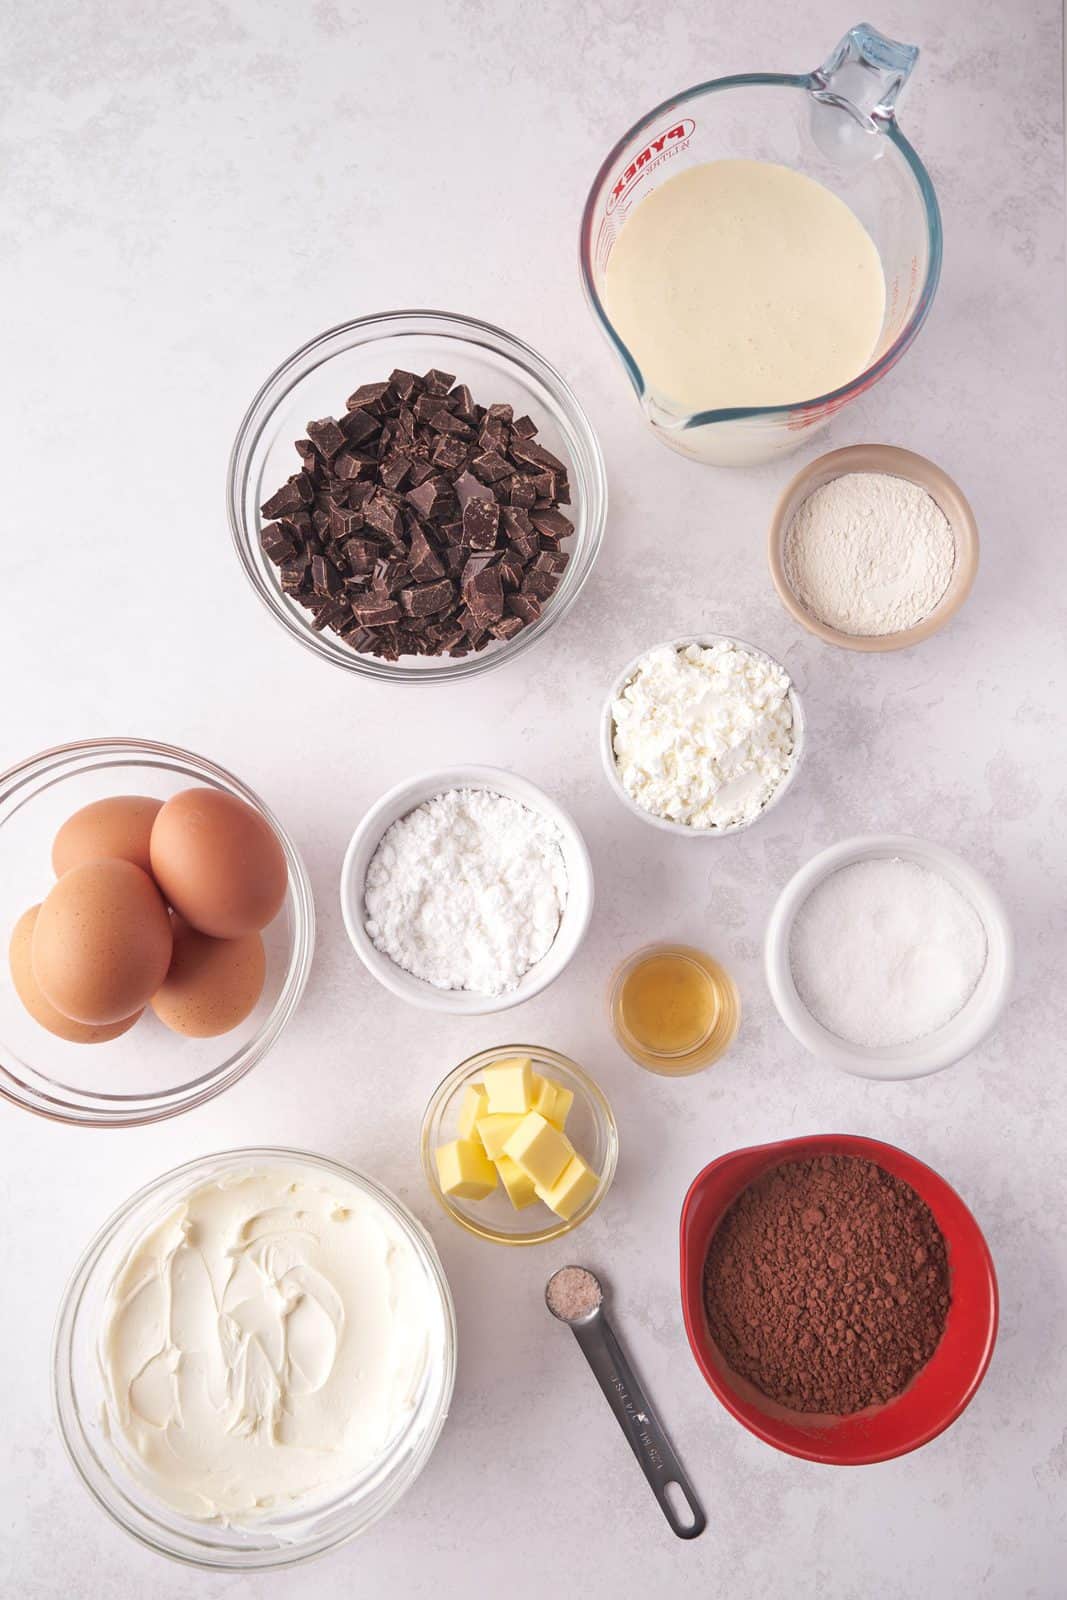 Ingredients needed: all-purpose flour, cornflour, cocoa powder, eggs, granulated sugar, salted butter, mascarpone cheese, powdered sugar, vanilla extract, heavy whipping cream and semi-sweet chocolate. 